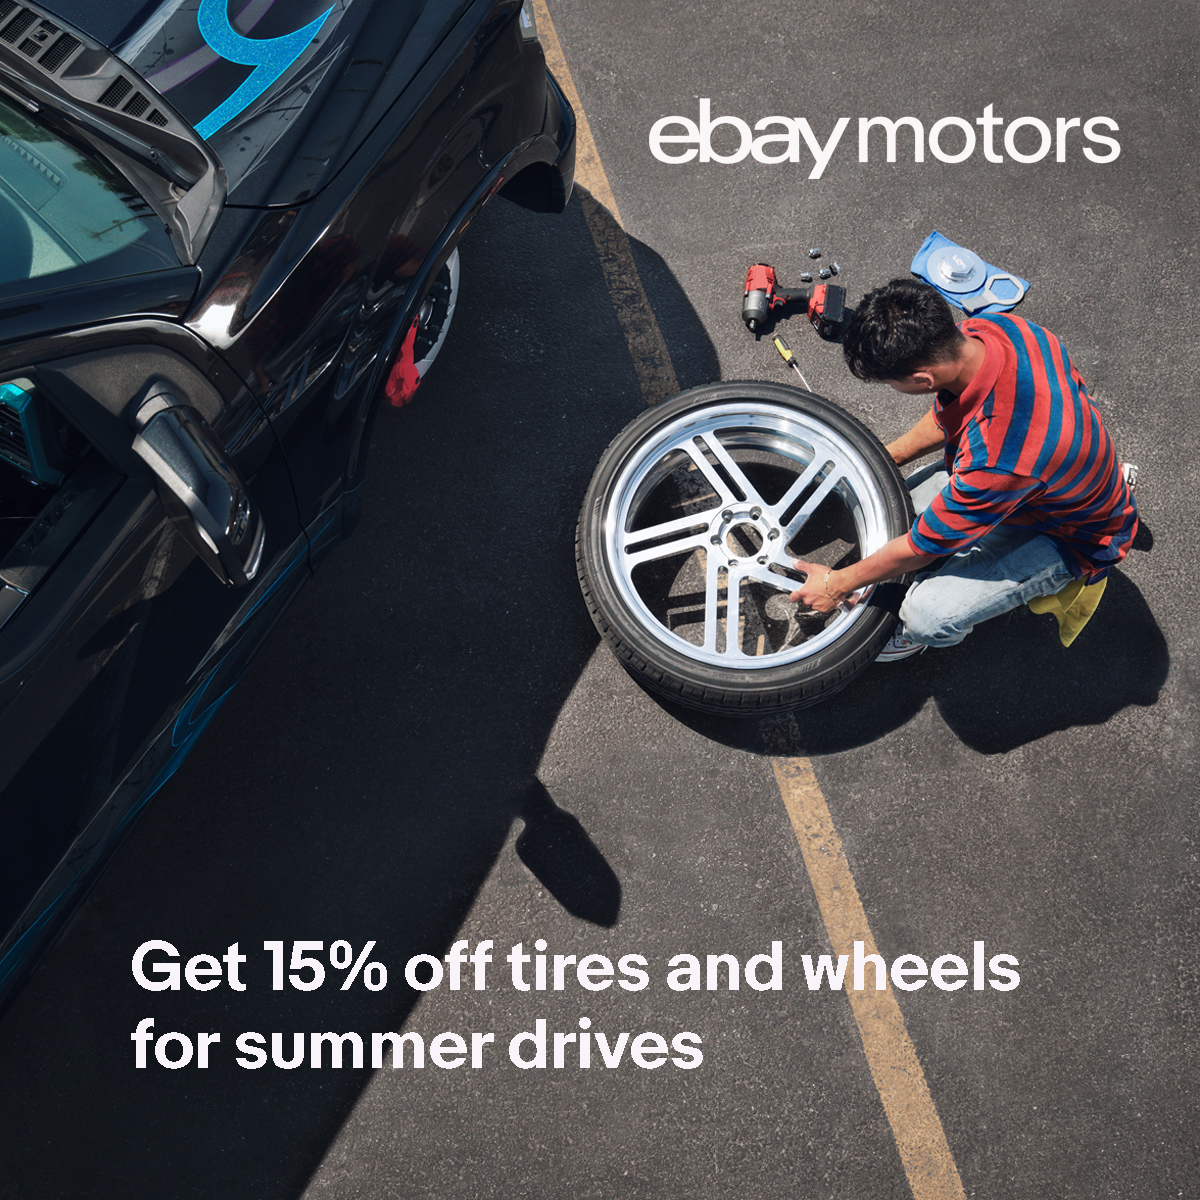 Get your ride ready for summer with 15% off tires and wheels. We've got your sets covered with a massive selection from your favourite brands on #eBayMotors. Grab what you need to get moving today: ebay.to/SaveOnTires15 See full terms. Offer ends 4/14.